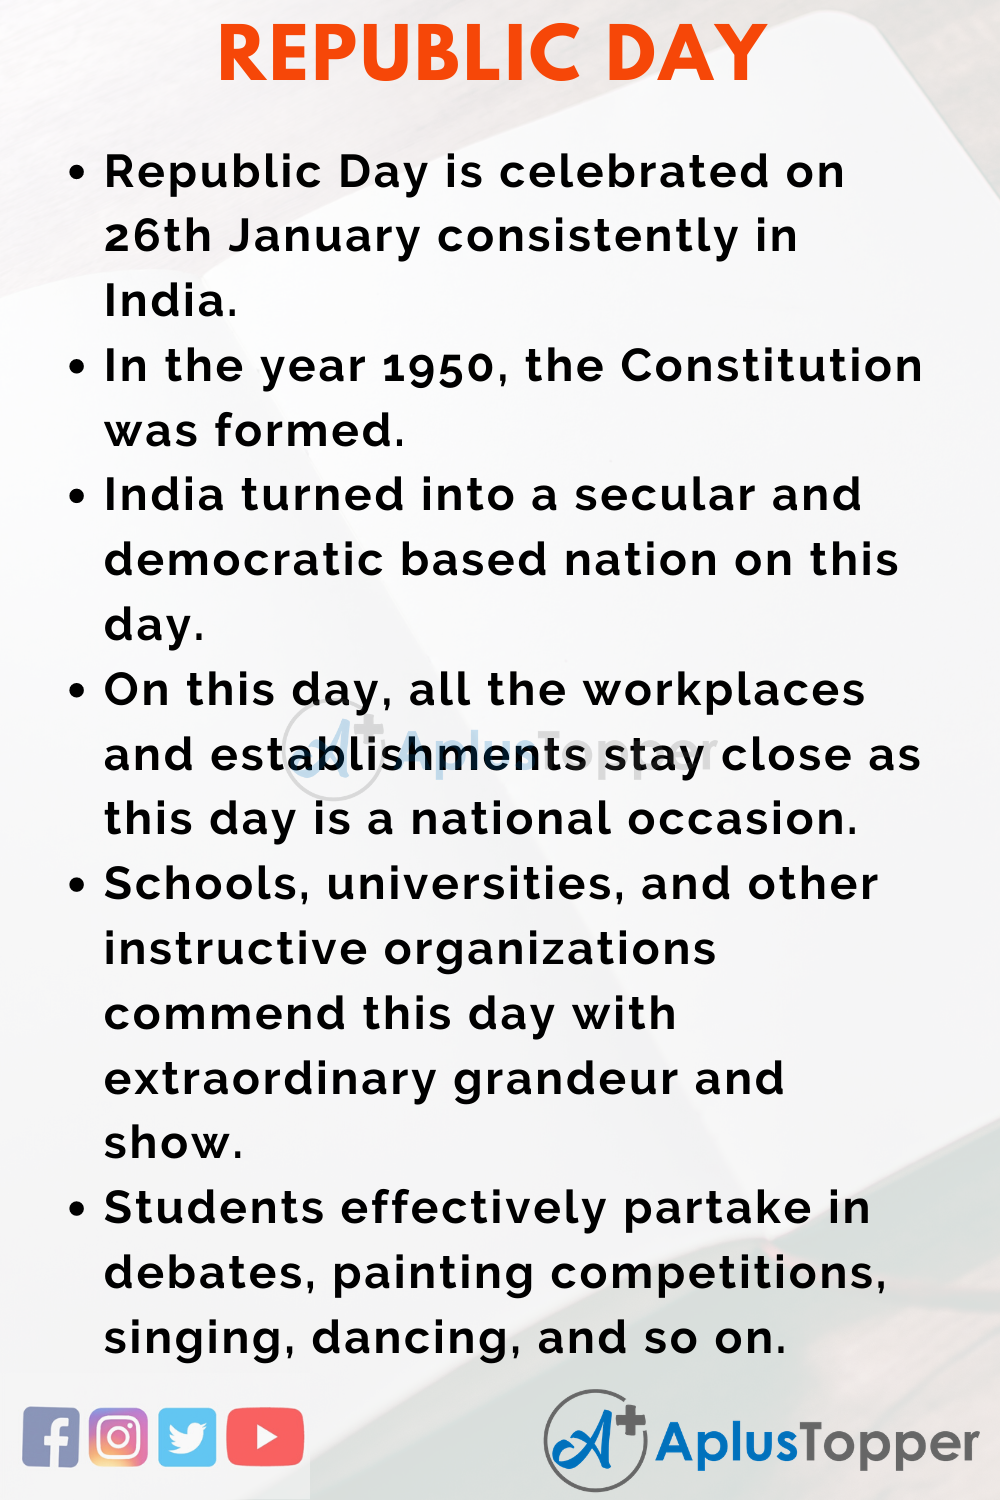 welcome speech quotes for republic day